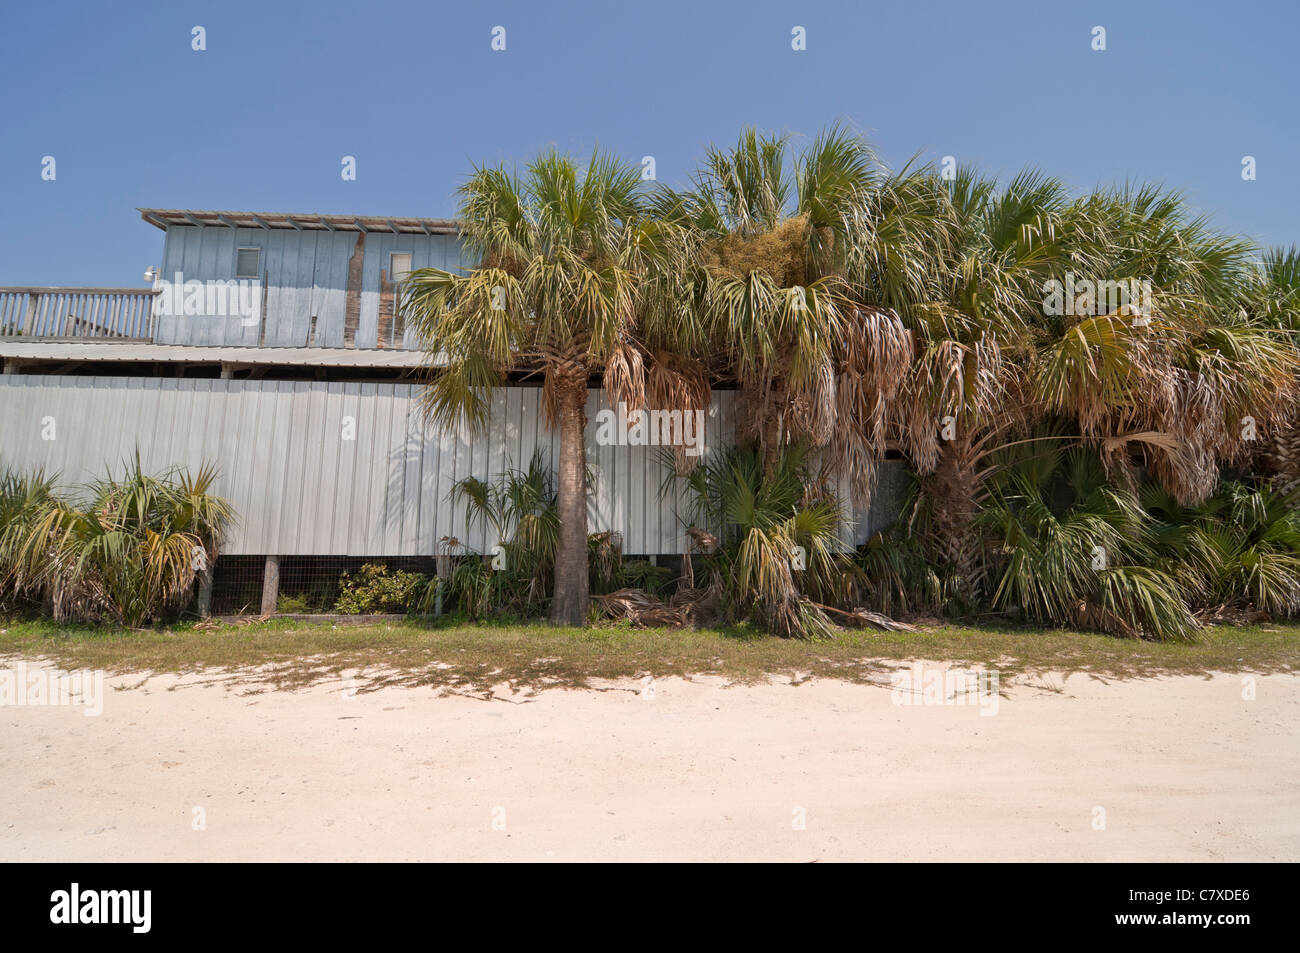 Sabal palmetto trees take over an old building in the funky Gulf coastal town of Horseshoe Beach Florida. Stock Photo